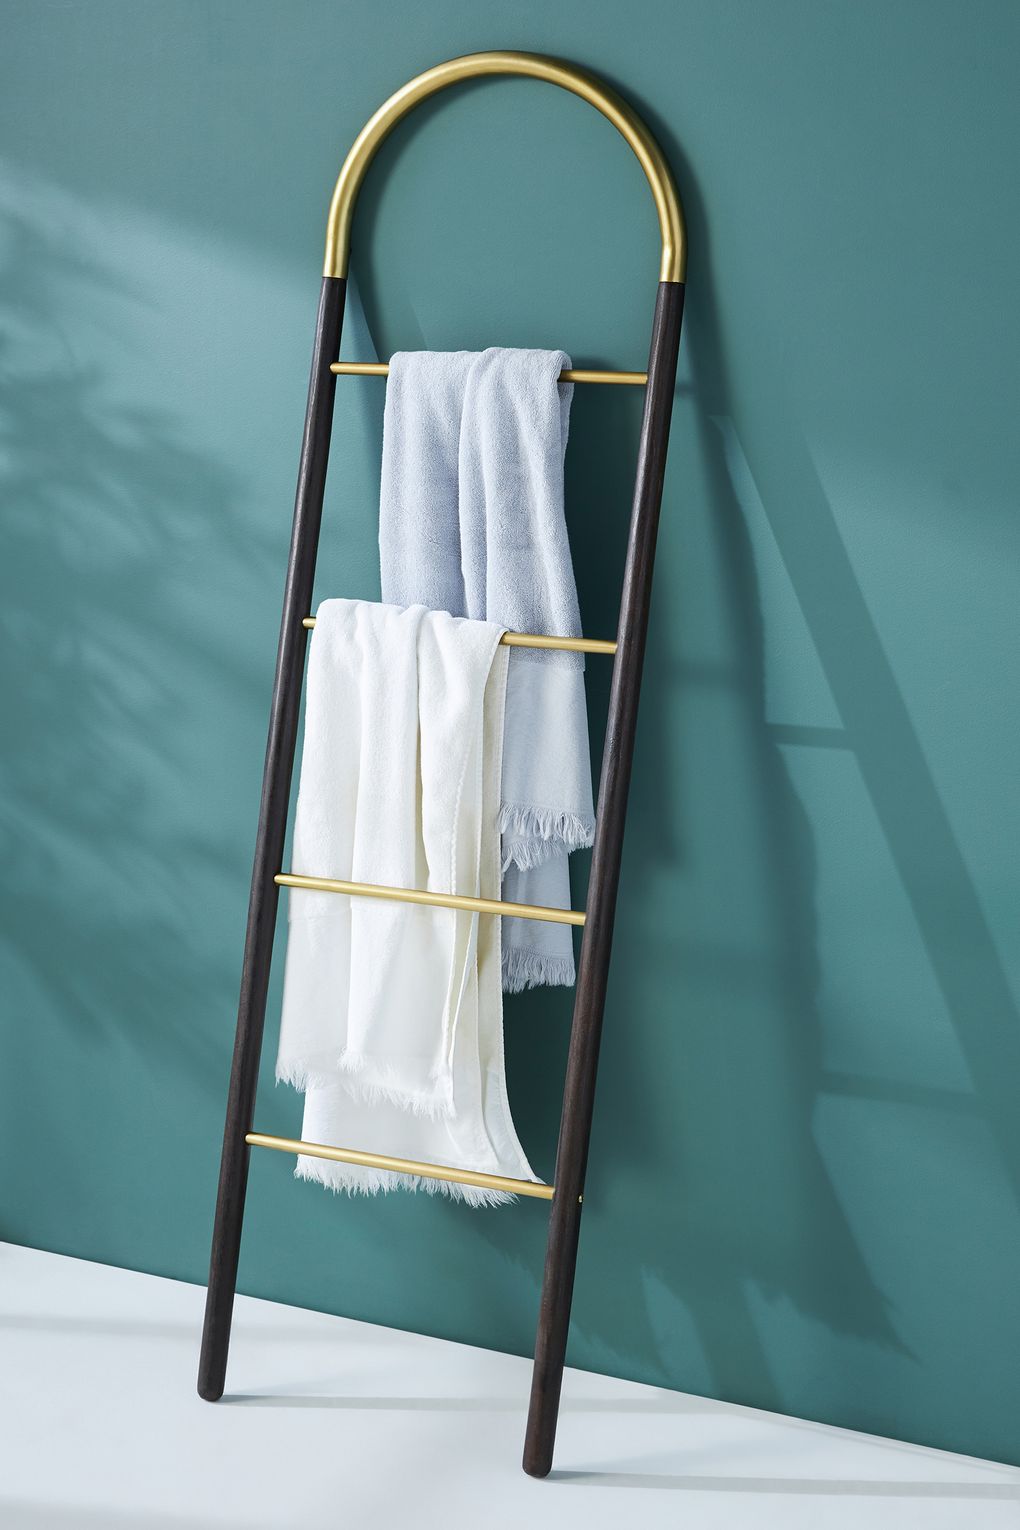 The Anthropologie Avery Ladder is made of natural wood with brushed-brass accents. (Courtesy of Anthropologie)